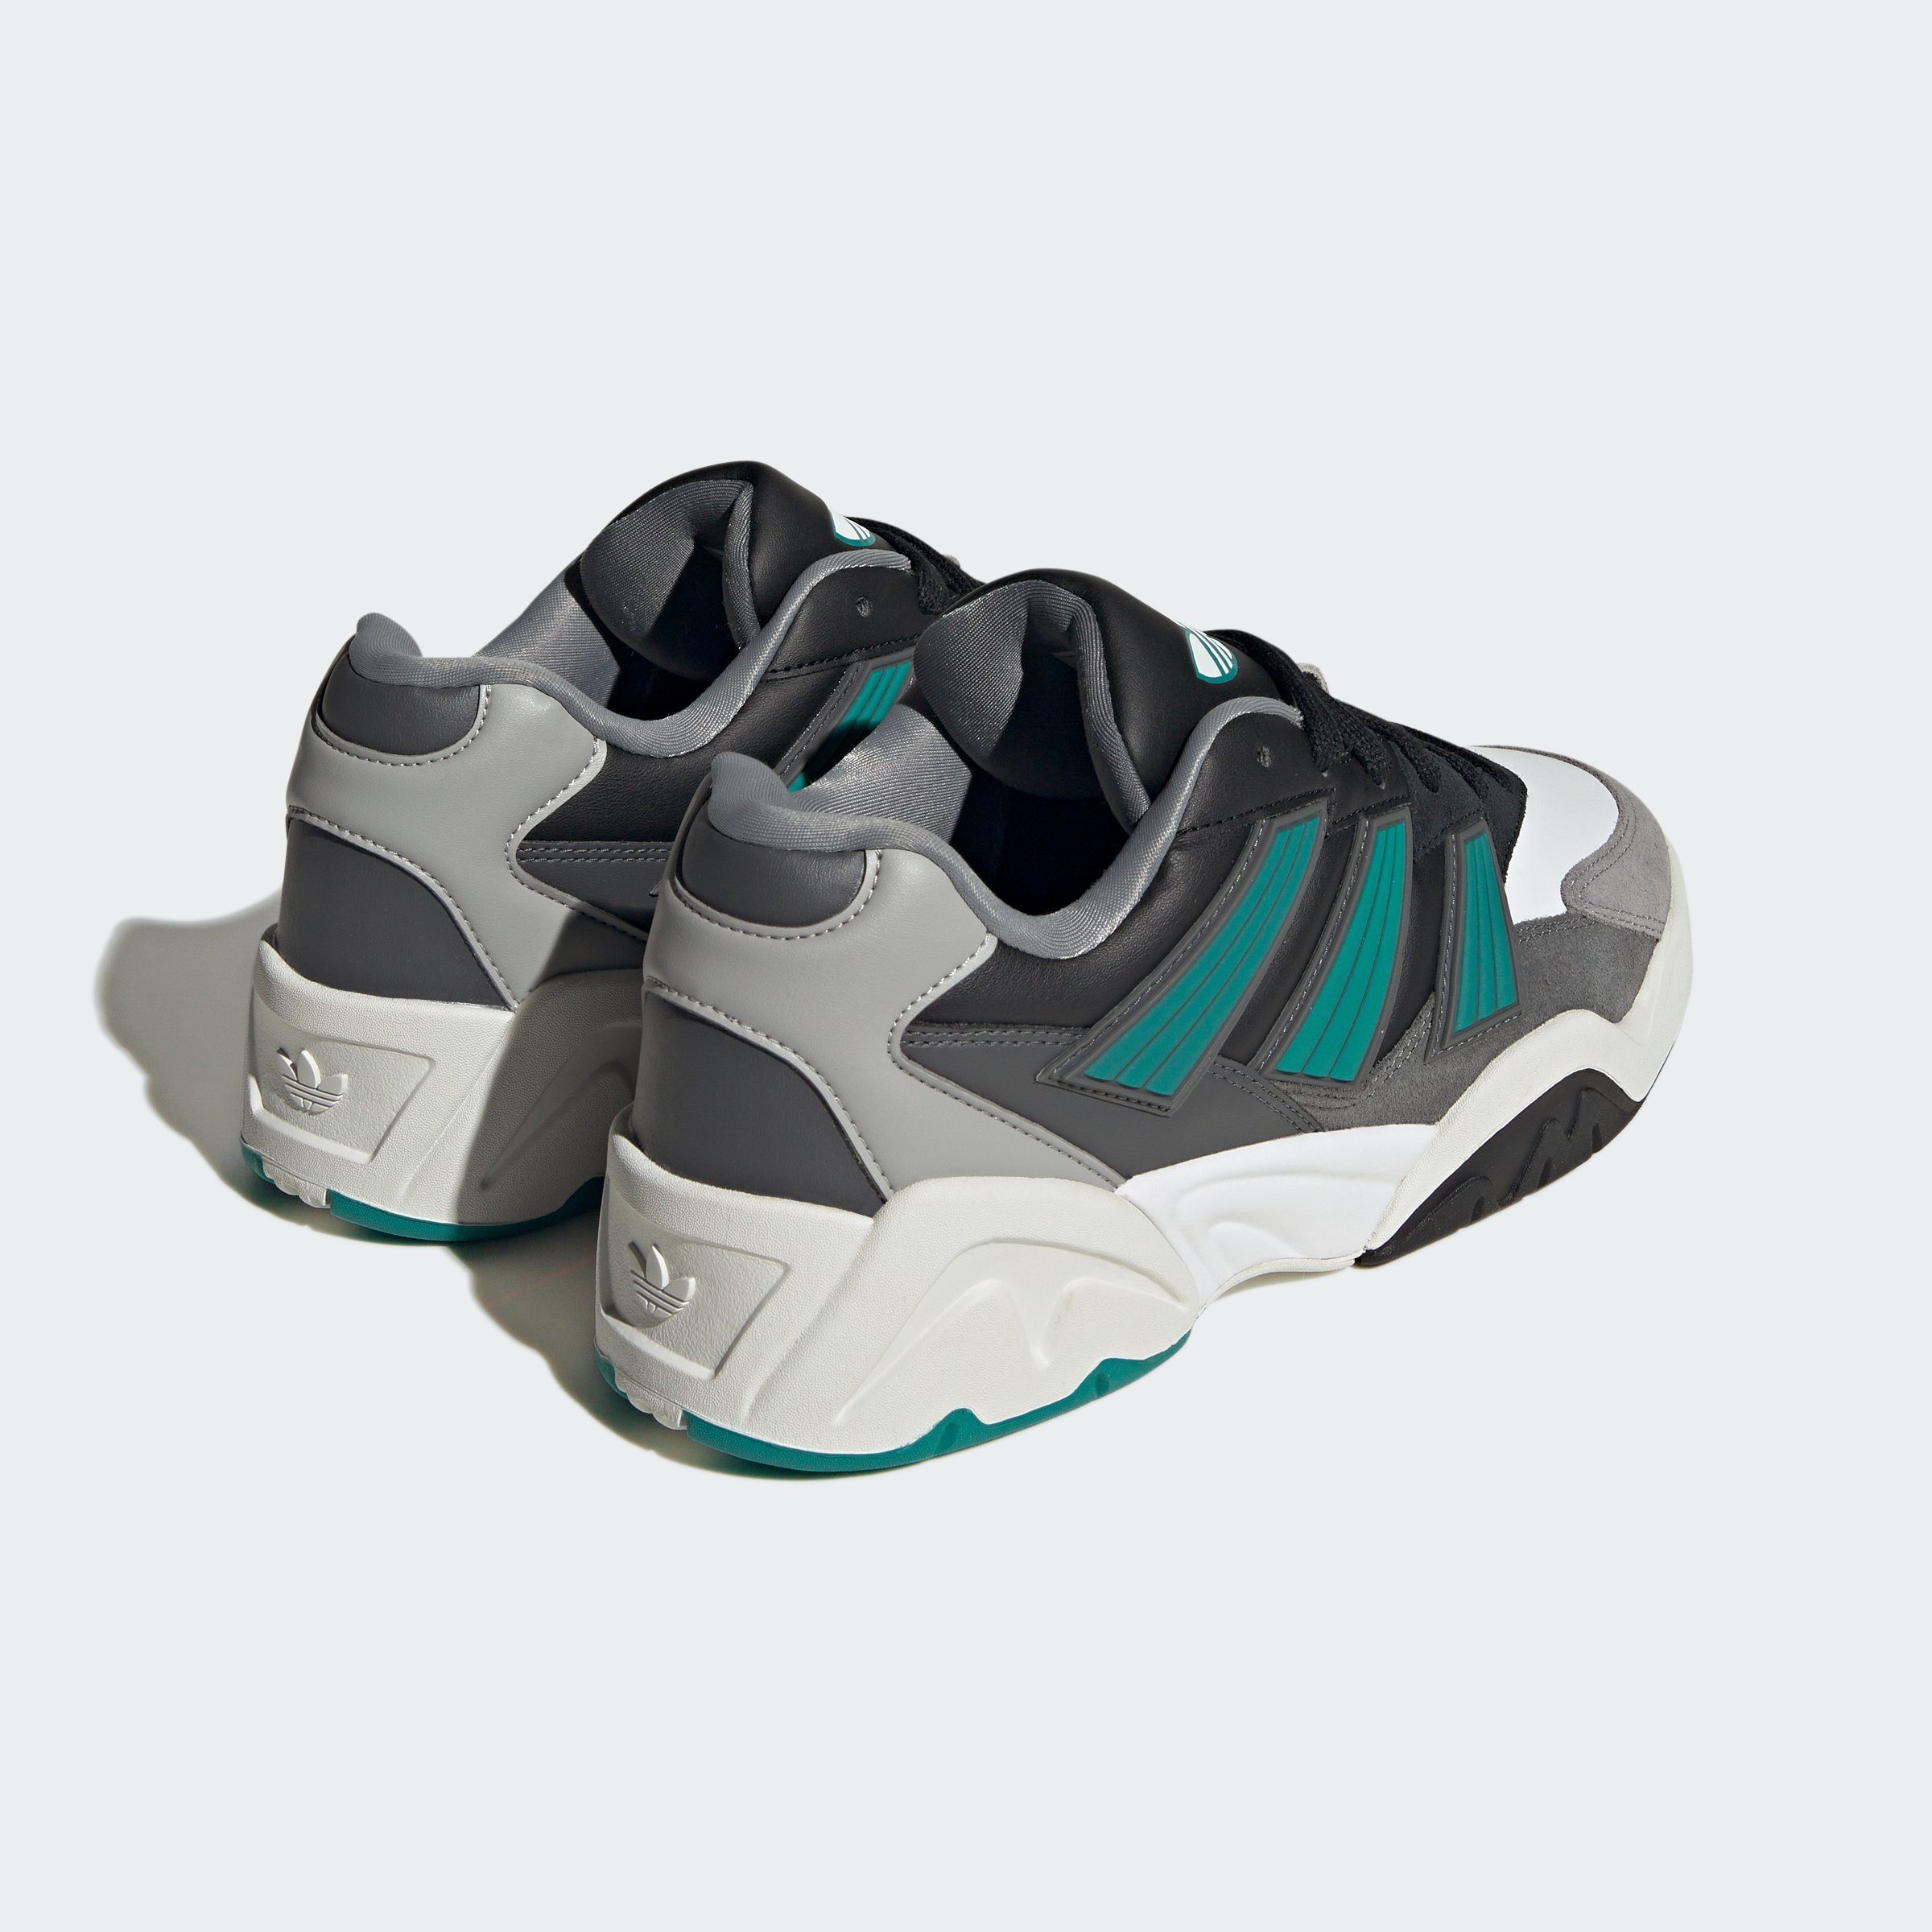 MAGNETIC Green White Sneaker Eqt COURT Originals Cloud / White / Crystal adidas